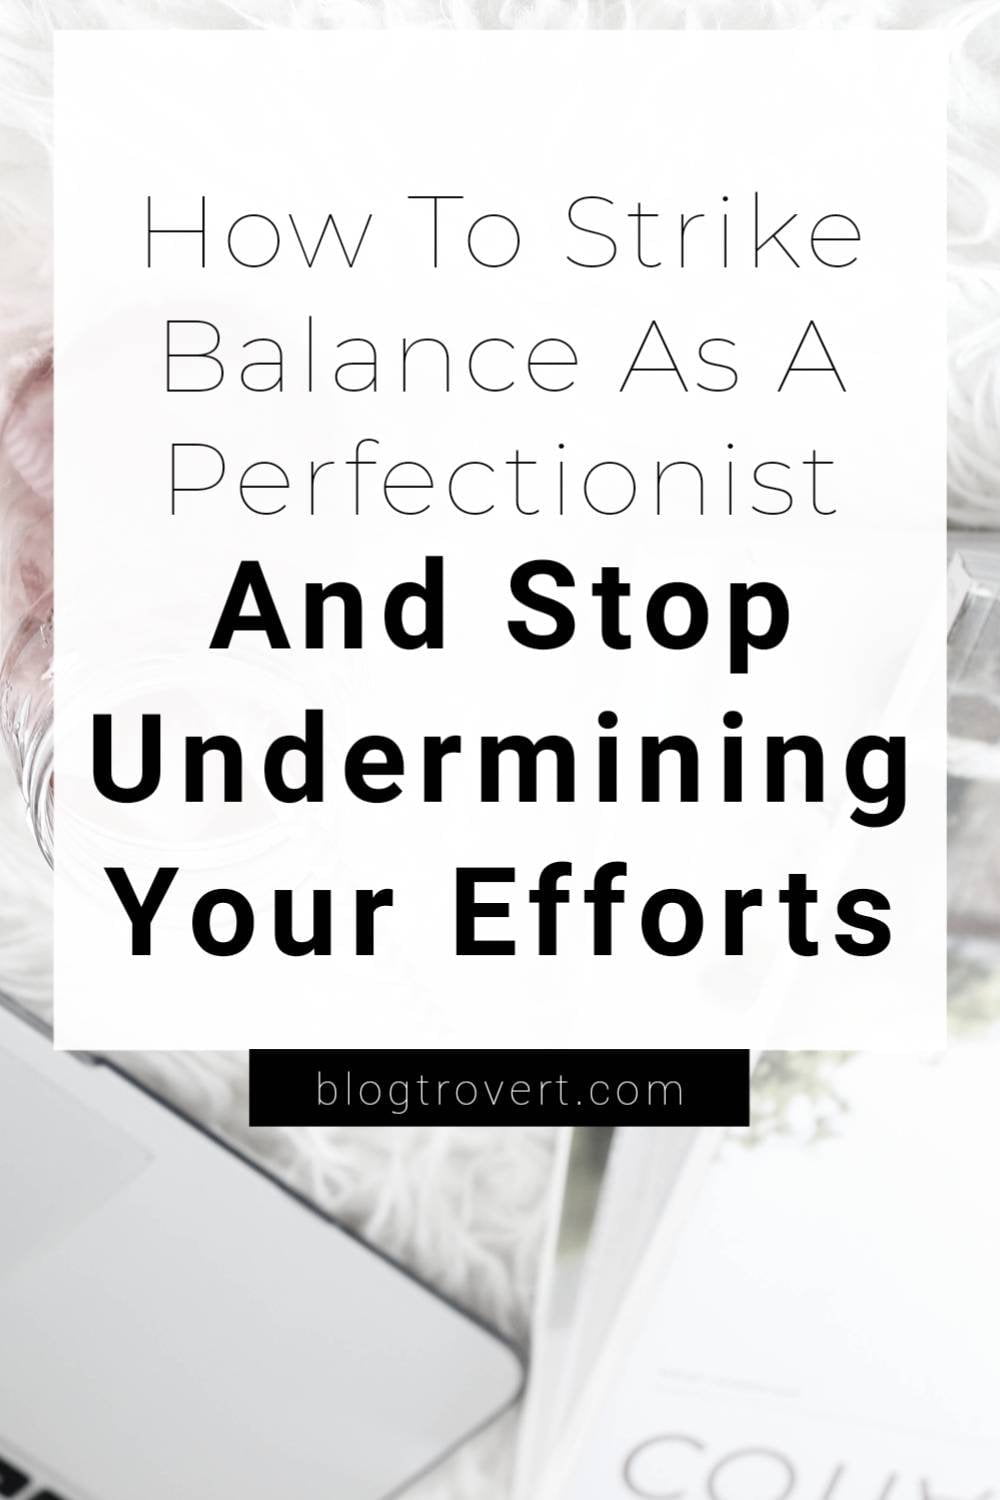 Perfectionism: How To Strike Balance As A Perfectionist 2